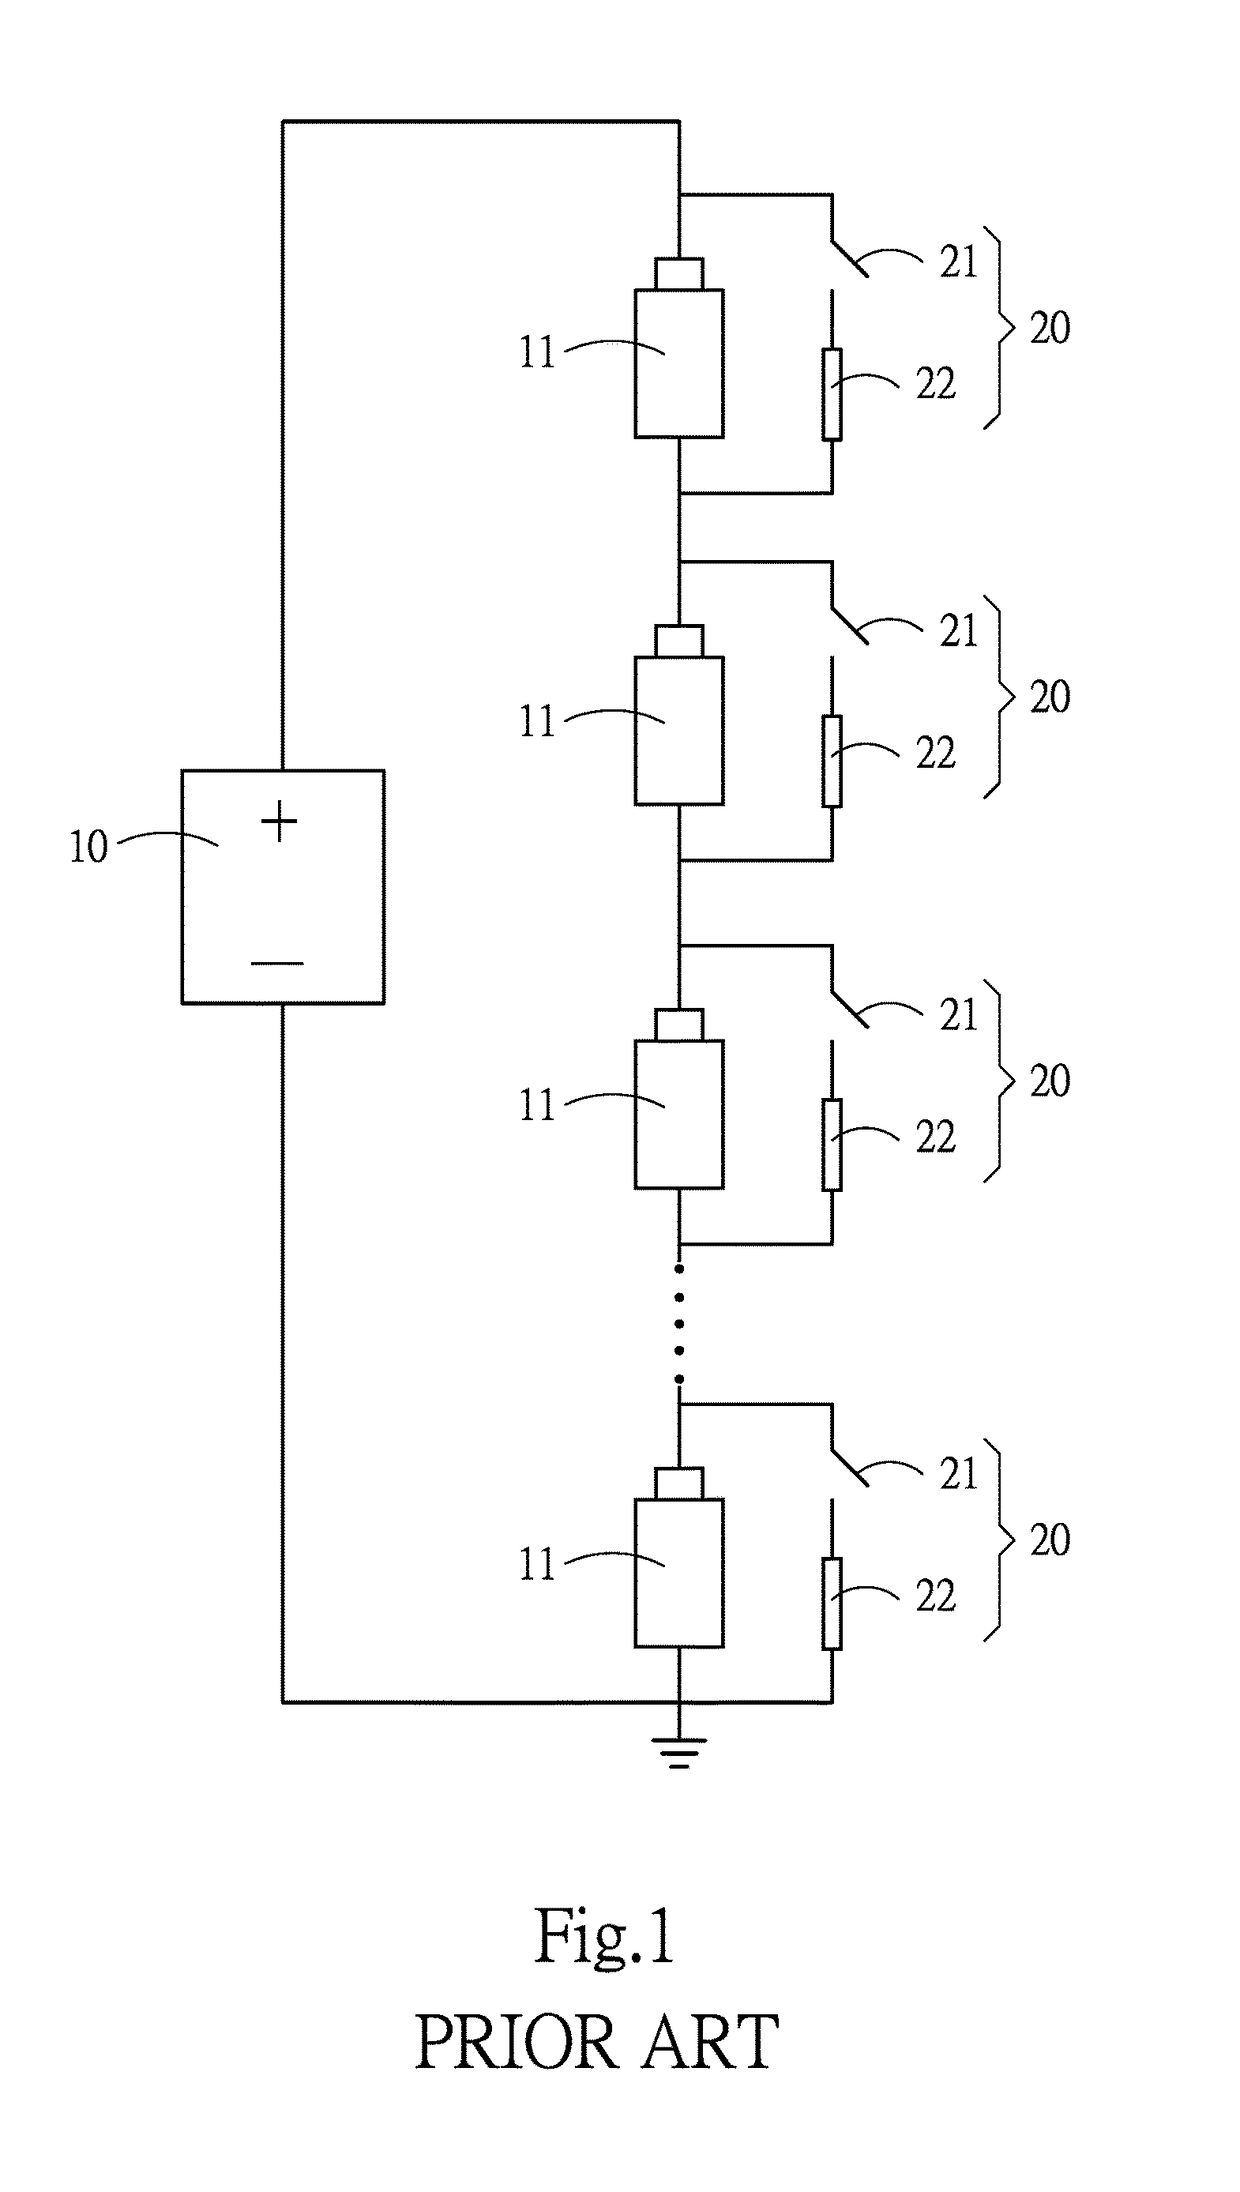 Battery charge-discharge balancing circuit assembly